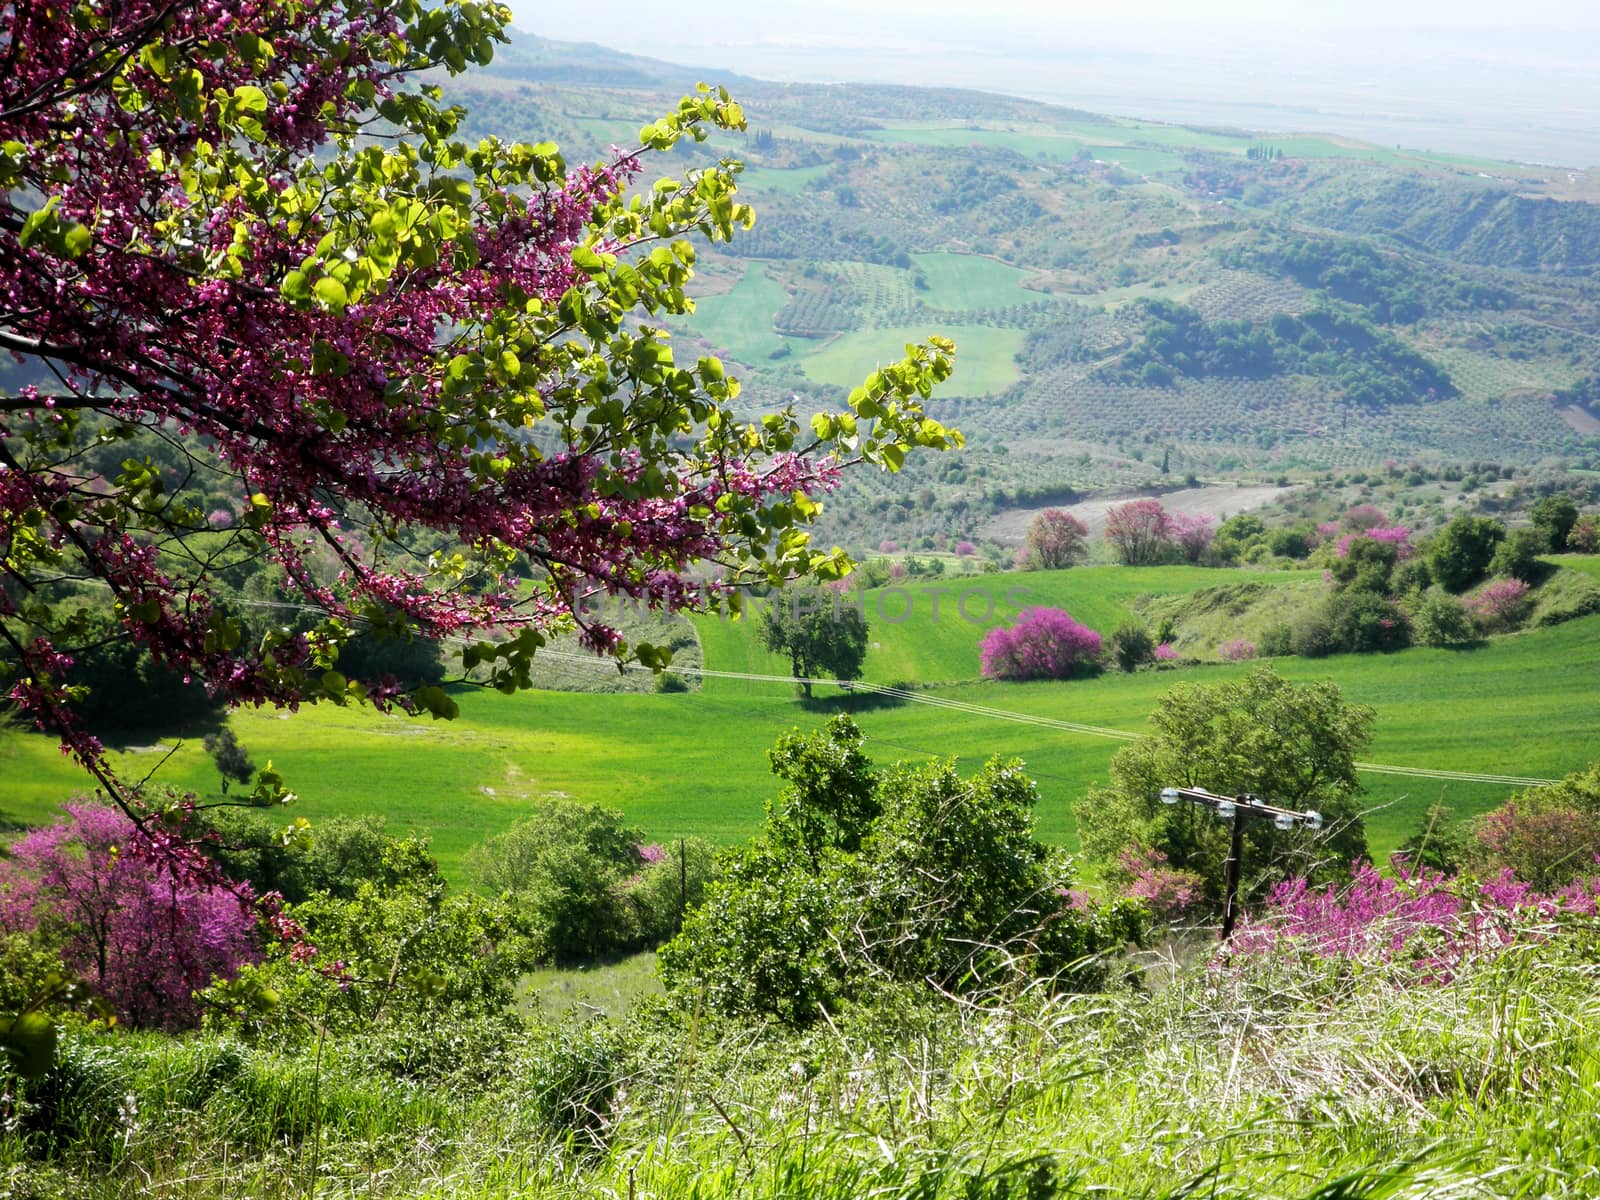 Panoramic view of a green Greek meadow in central Greece.

Picture taken on April 20, 2012.